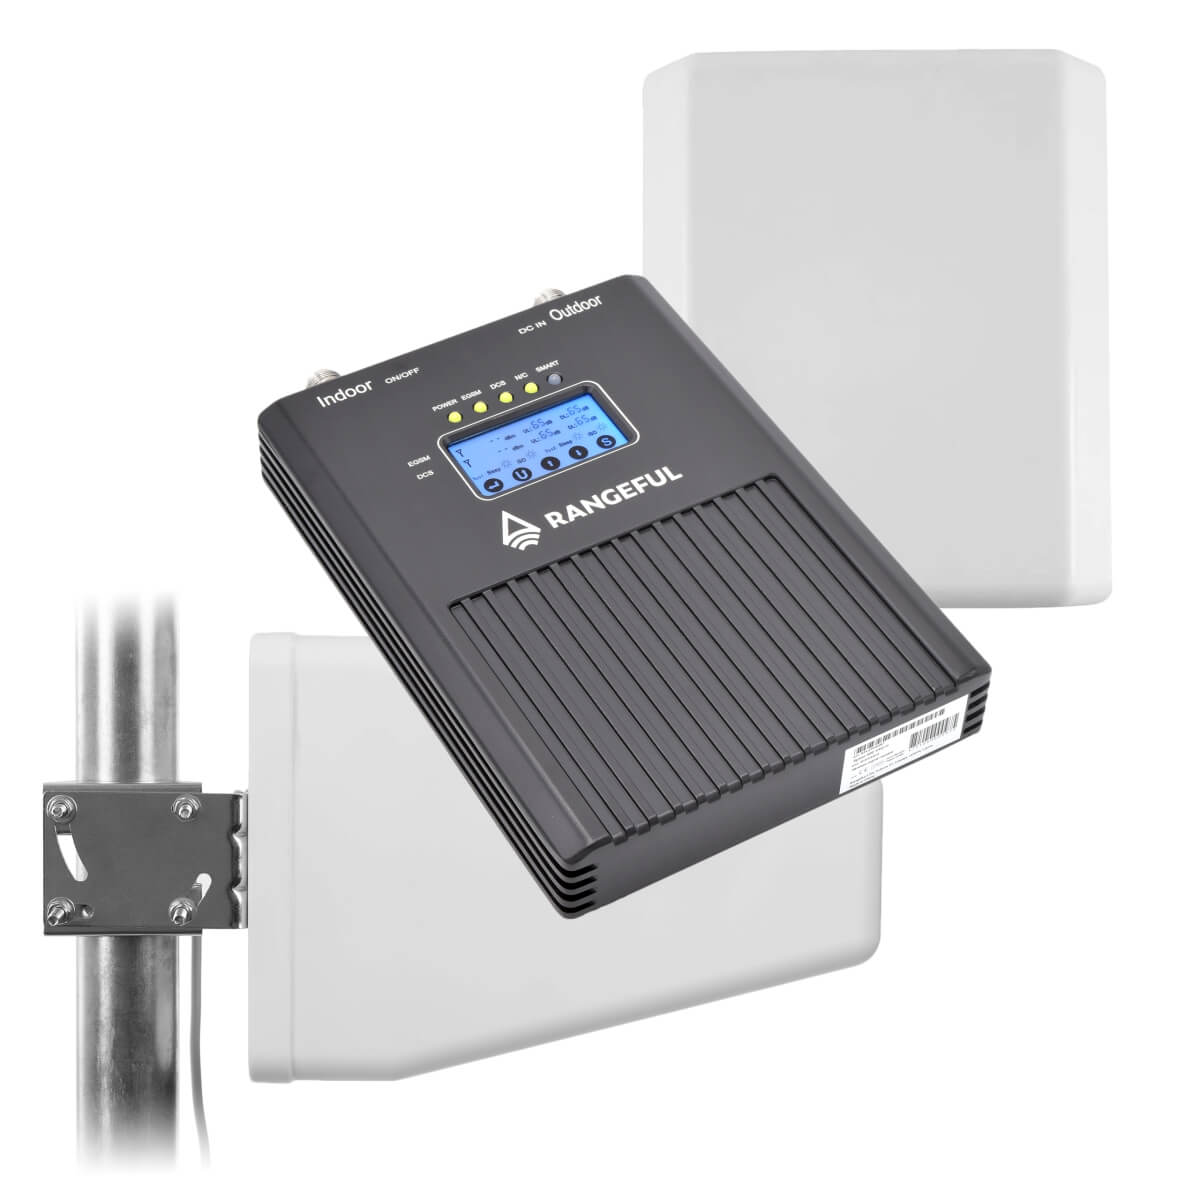 Spear 1000 PRO 5-Band Mobile Booster